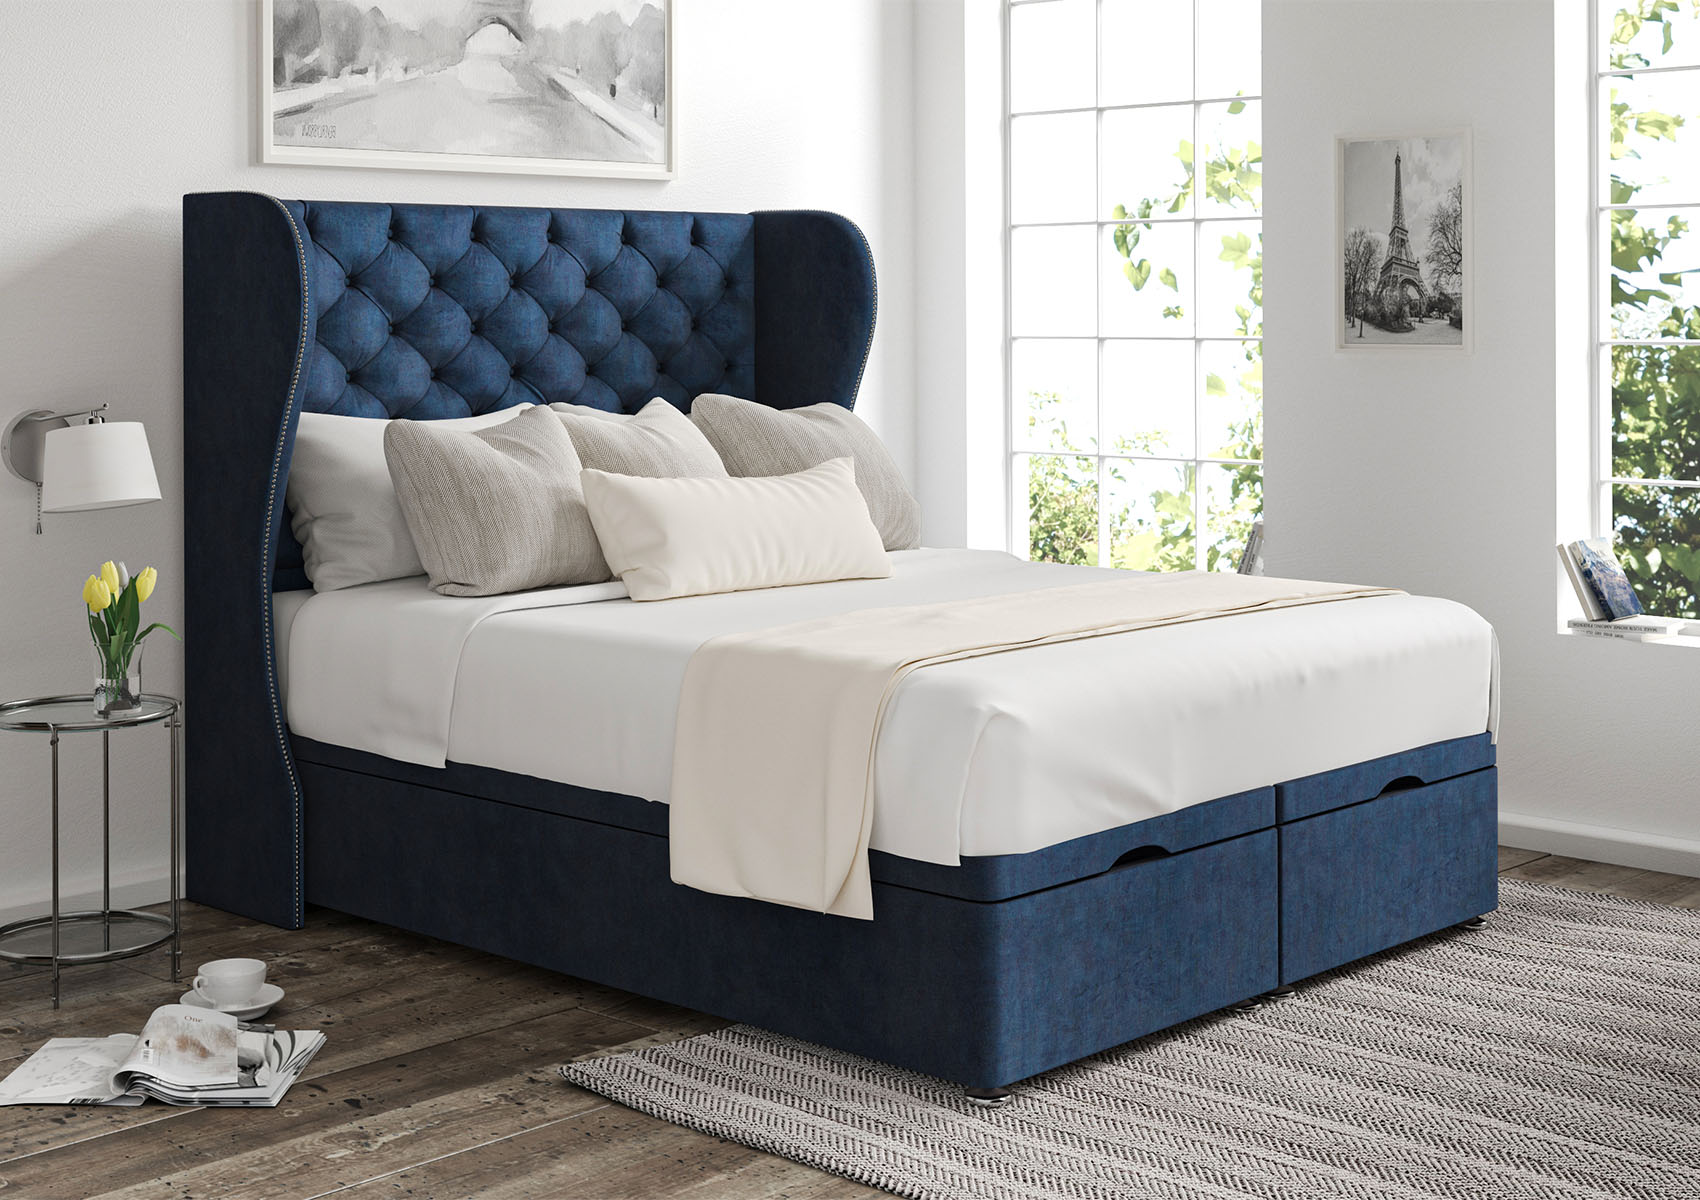 View Miami Heritage Steel Upholstered Super King Ottoman Bed Time4Sleep information